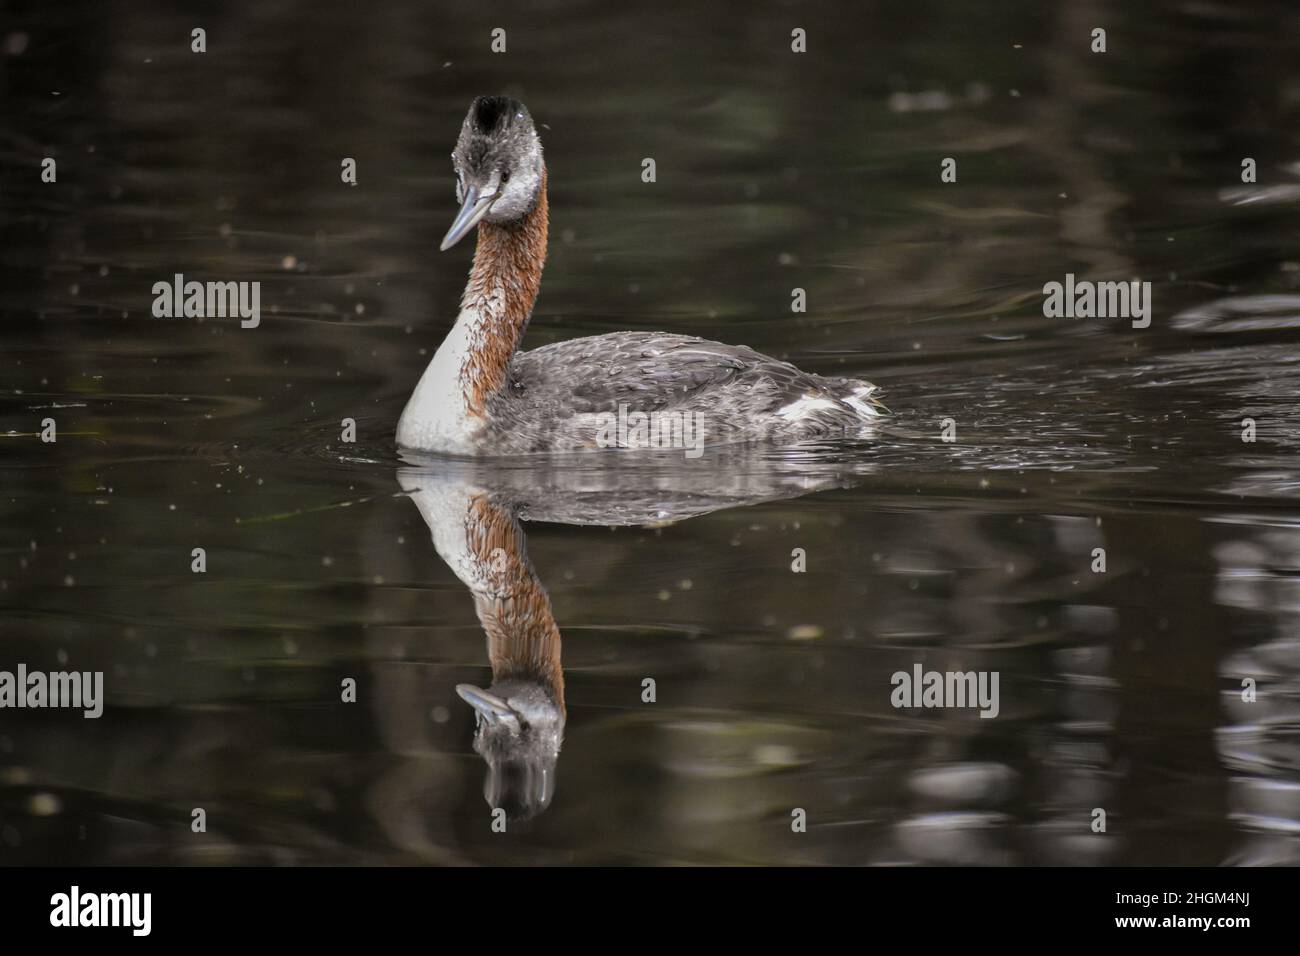 great grebe (Podiceps major), the largest type of grebe in the world, seen at lago de las regatas in Buenos Aires Stock Photo